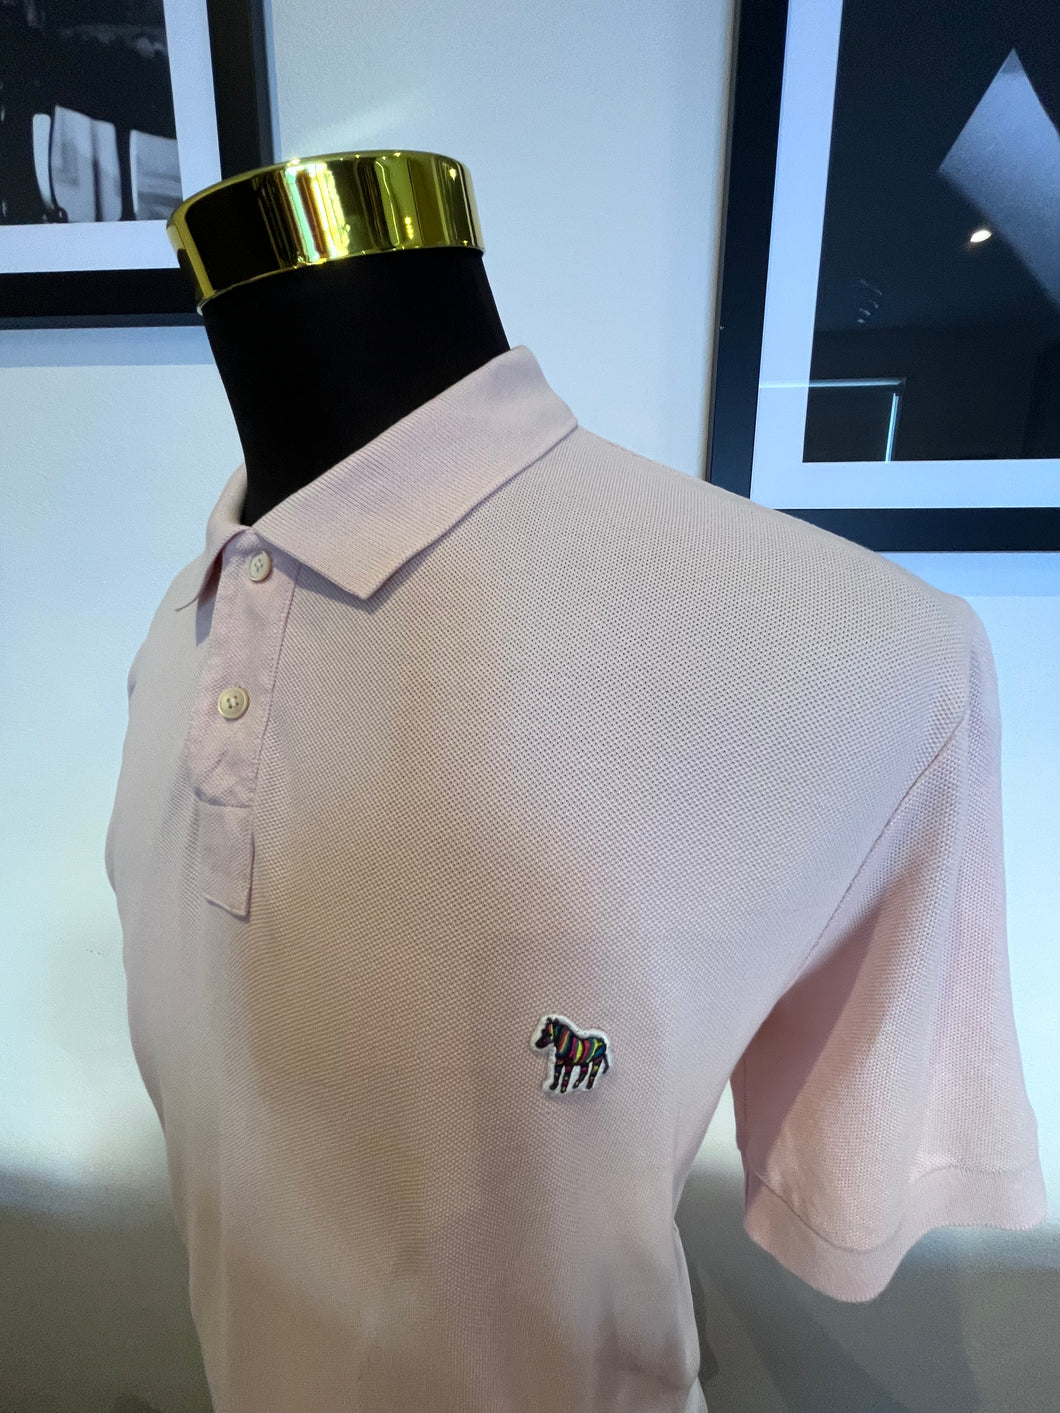 Paul Smith 100% Cotton Pink Polo Shirt Size XL Logo Chest Badge fits more like Large